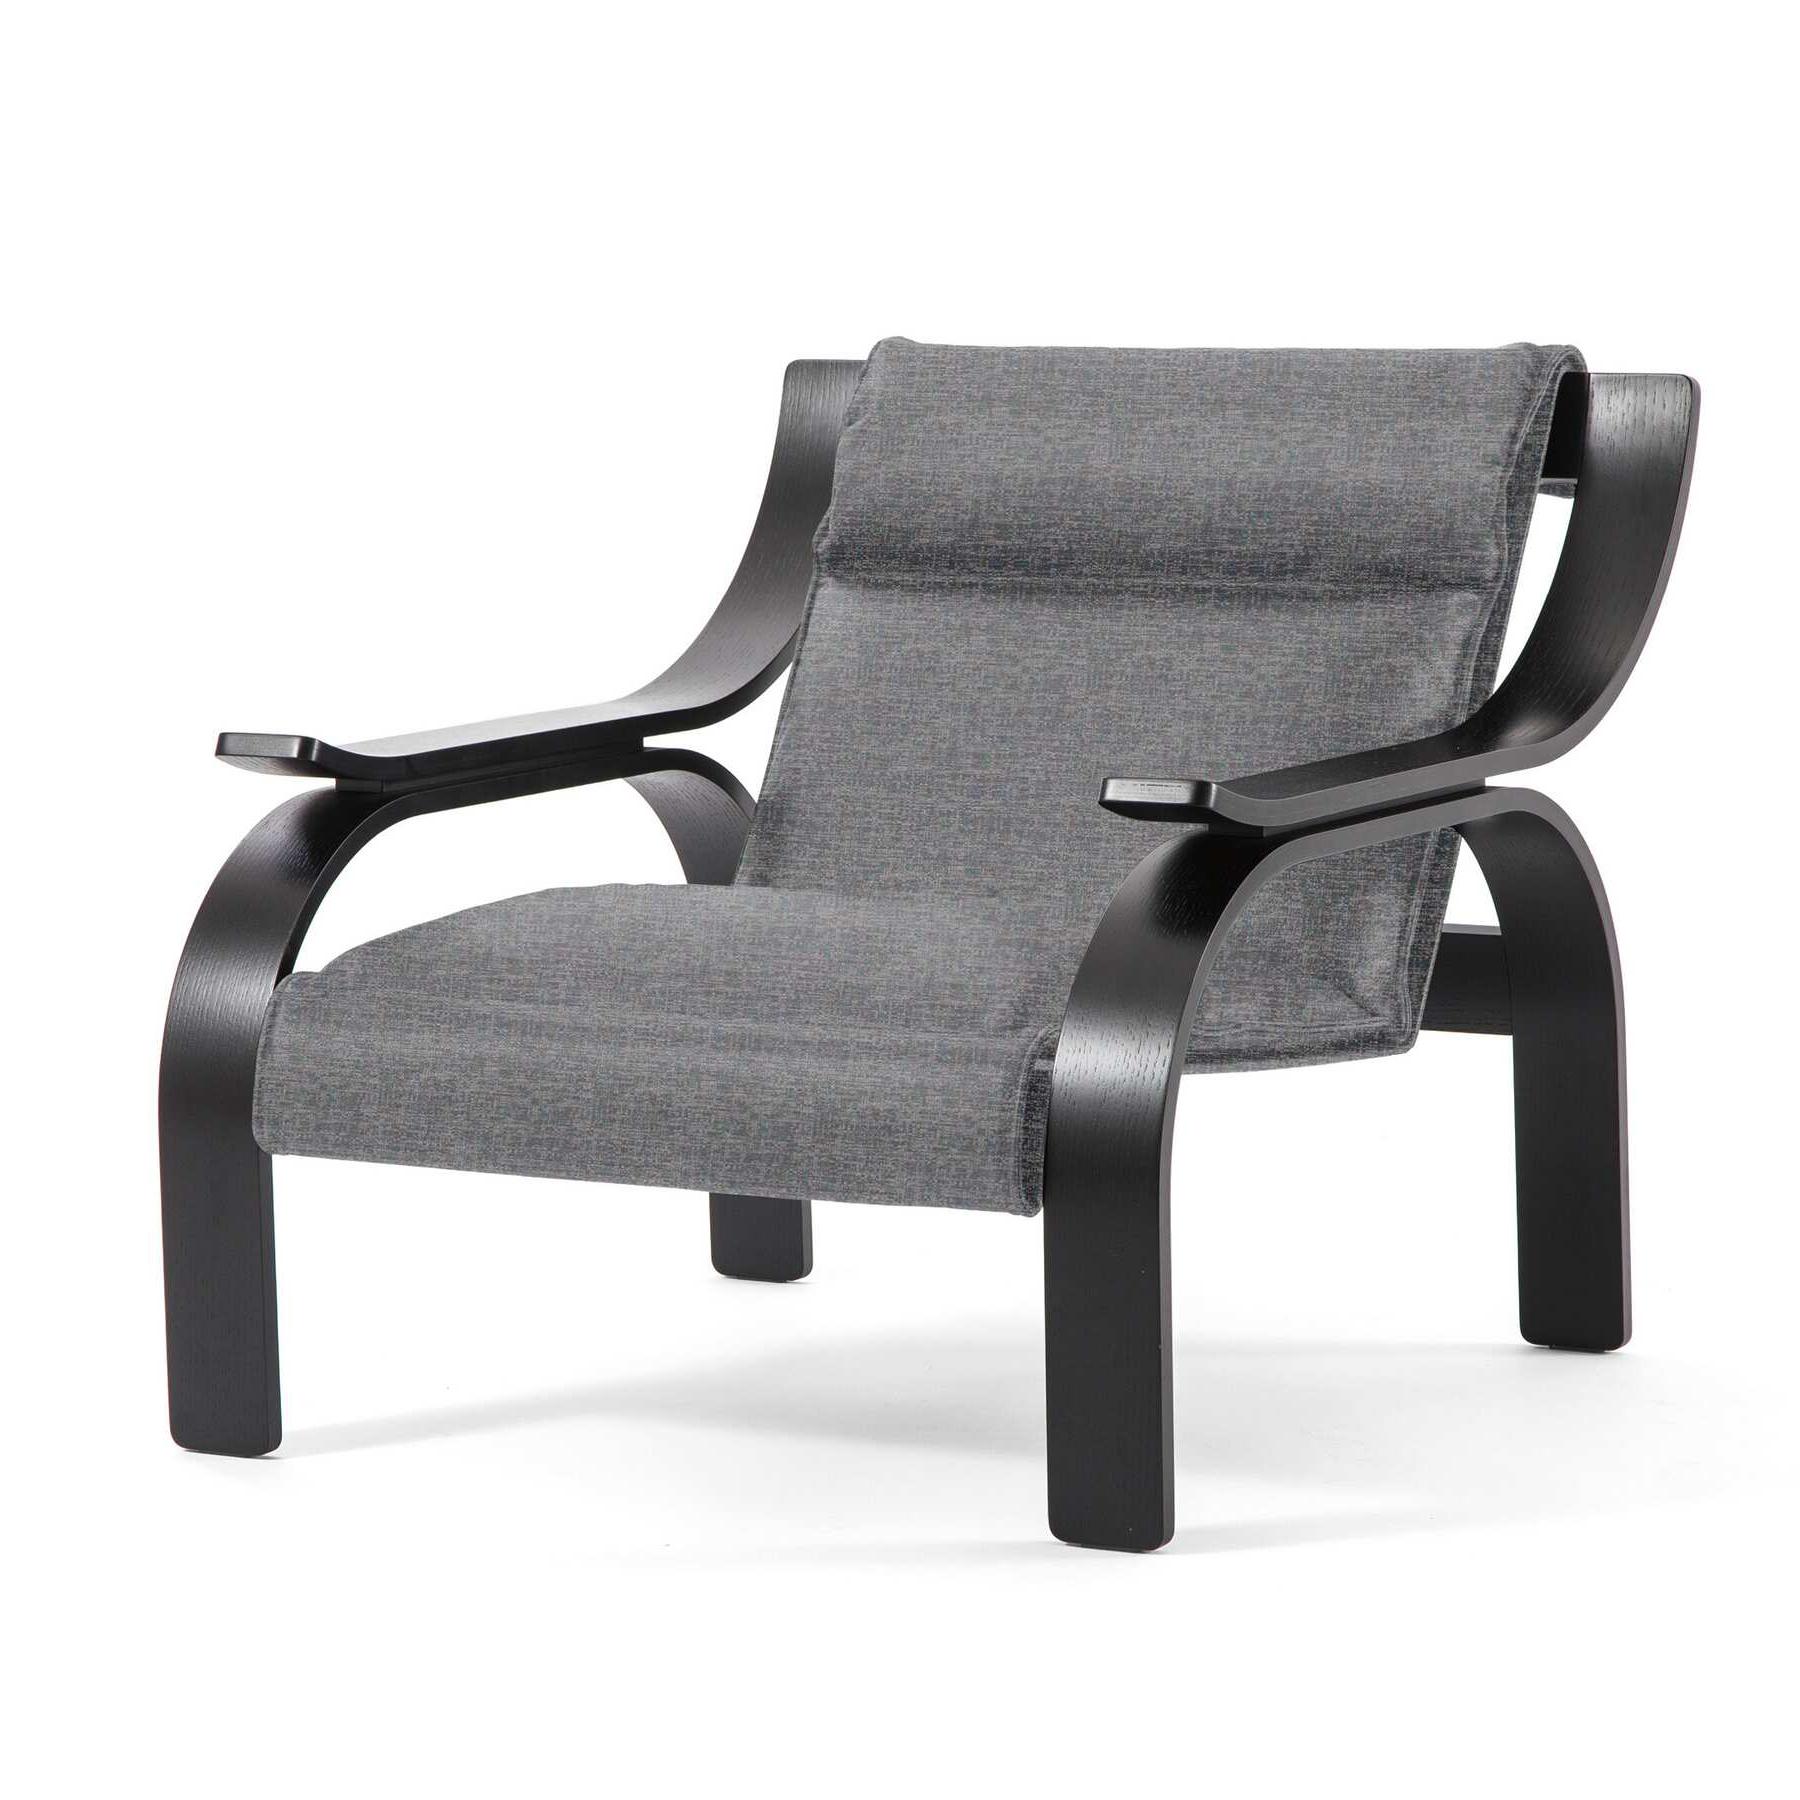 Woodline armchair designed by Marco Zanuso in 1964, relaunched in 2015.

Grey fabric and black stained wood.

Manufactured by Cassina in Italy.

An armchair with a striking, rigorous design, the outcome of research by Marco Zanuso on how to